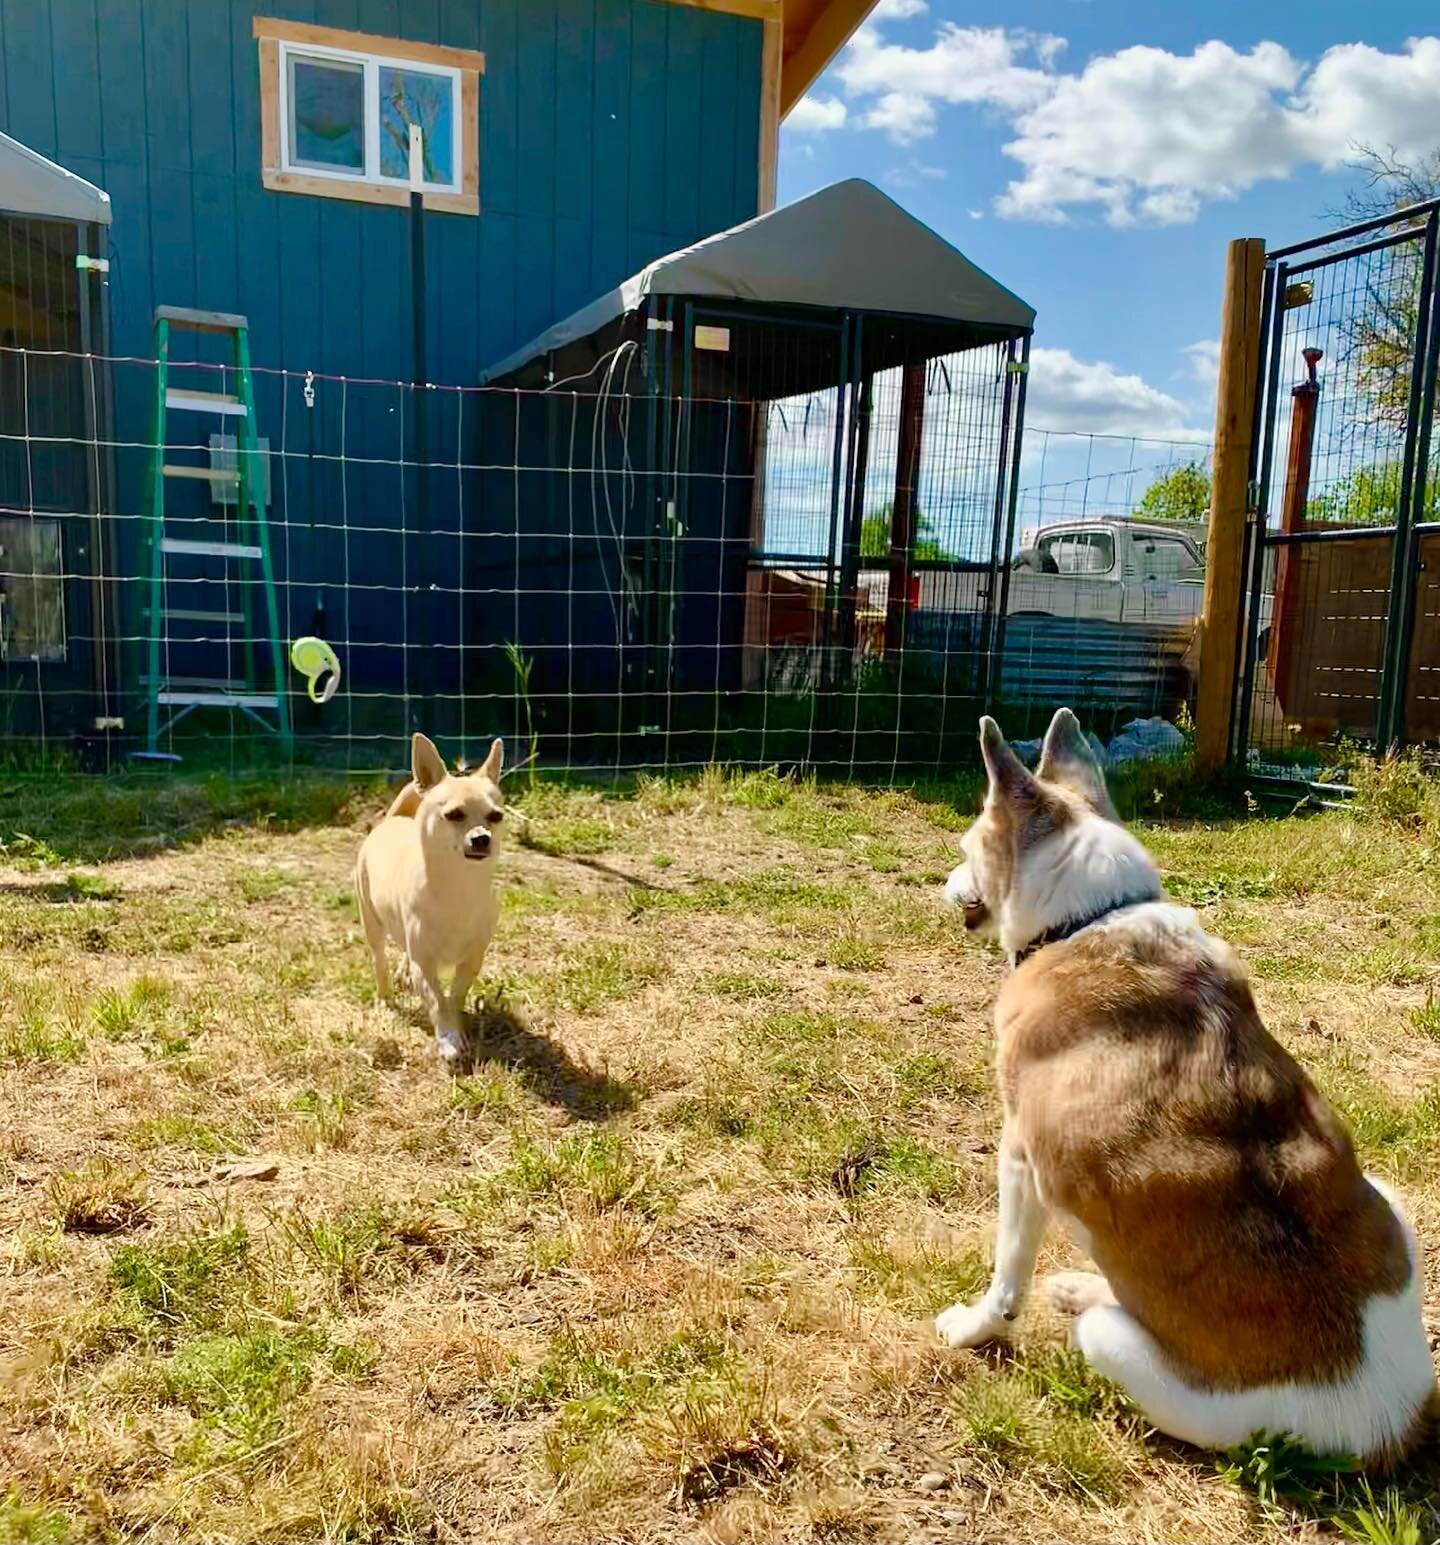 🌟&quot;A true friend accepts who you are, but also helps you become who you should be.&quot;❤️🐕🐕🥰 -Unknown 

#seemedogwalking #seemedogcare  #dogfriends #dogboarding #doggydaycare #dogcare #rescuedog #schipperkesofinstagram #lakecountyca